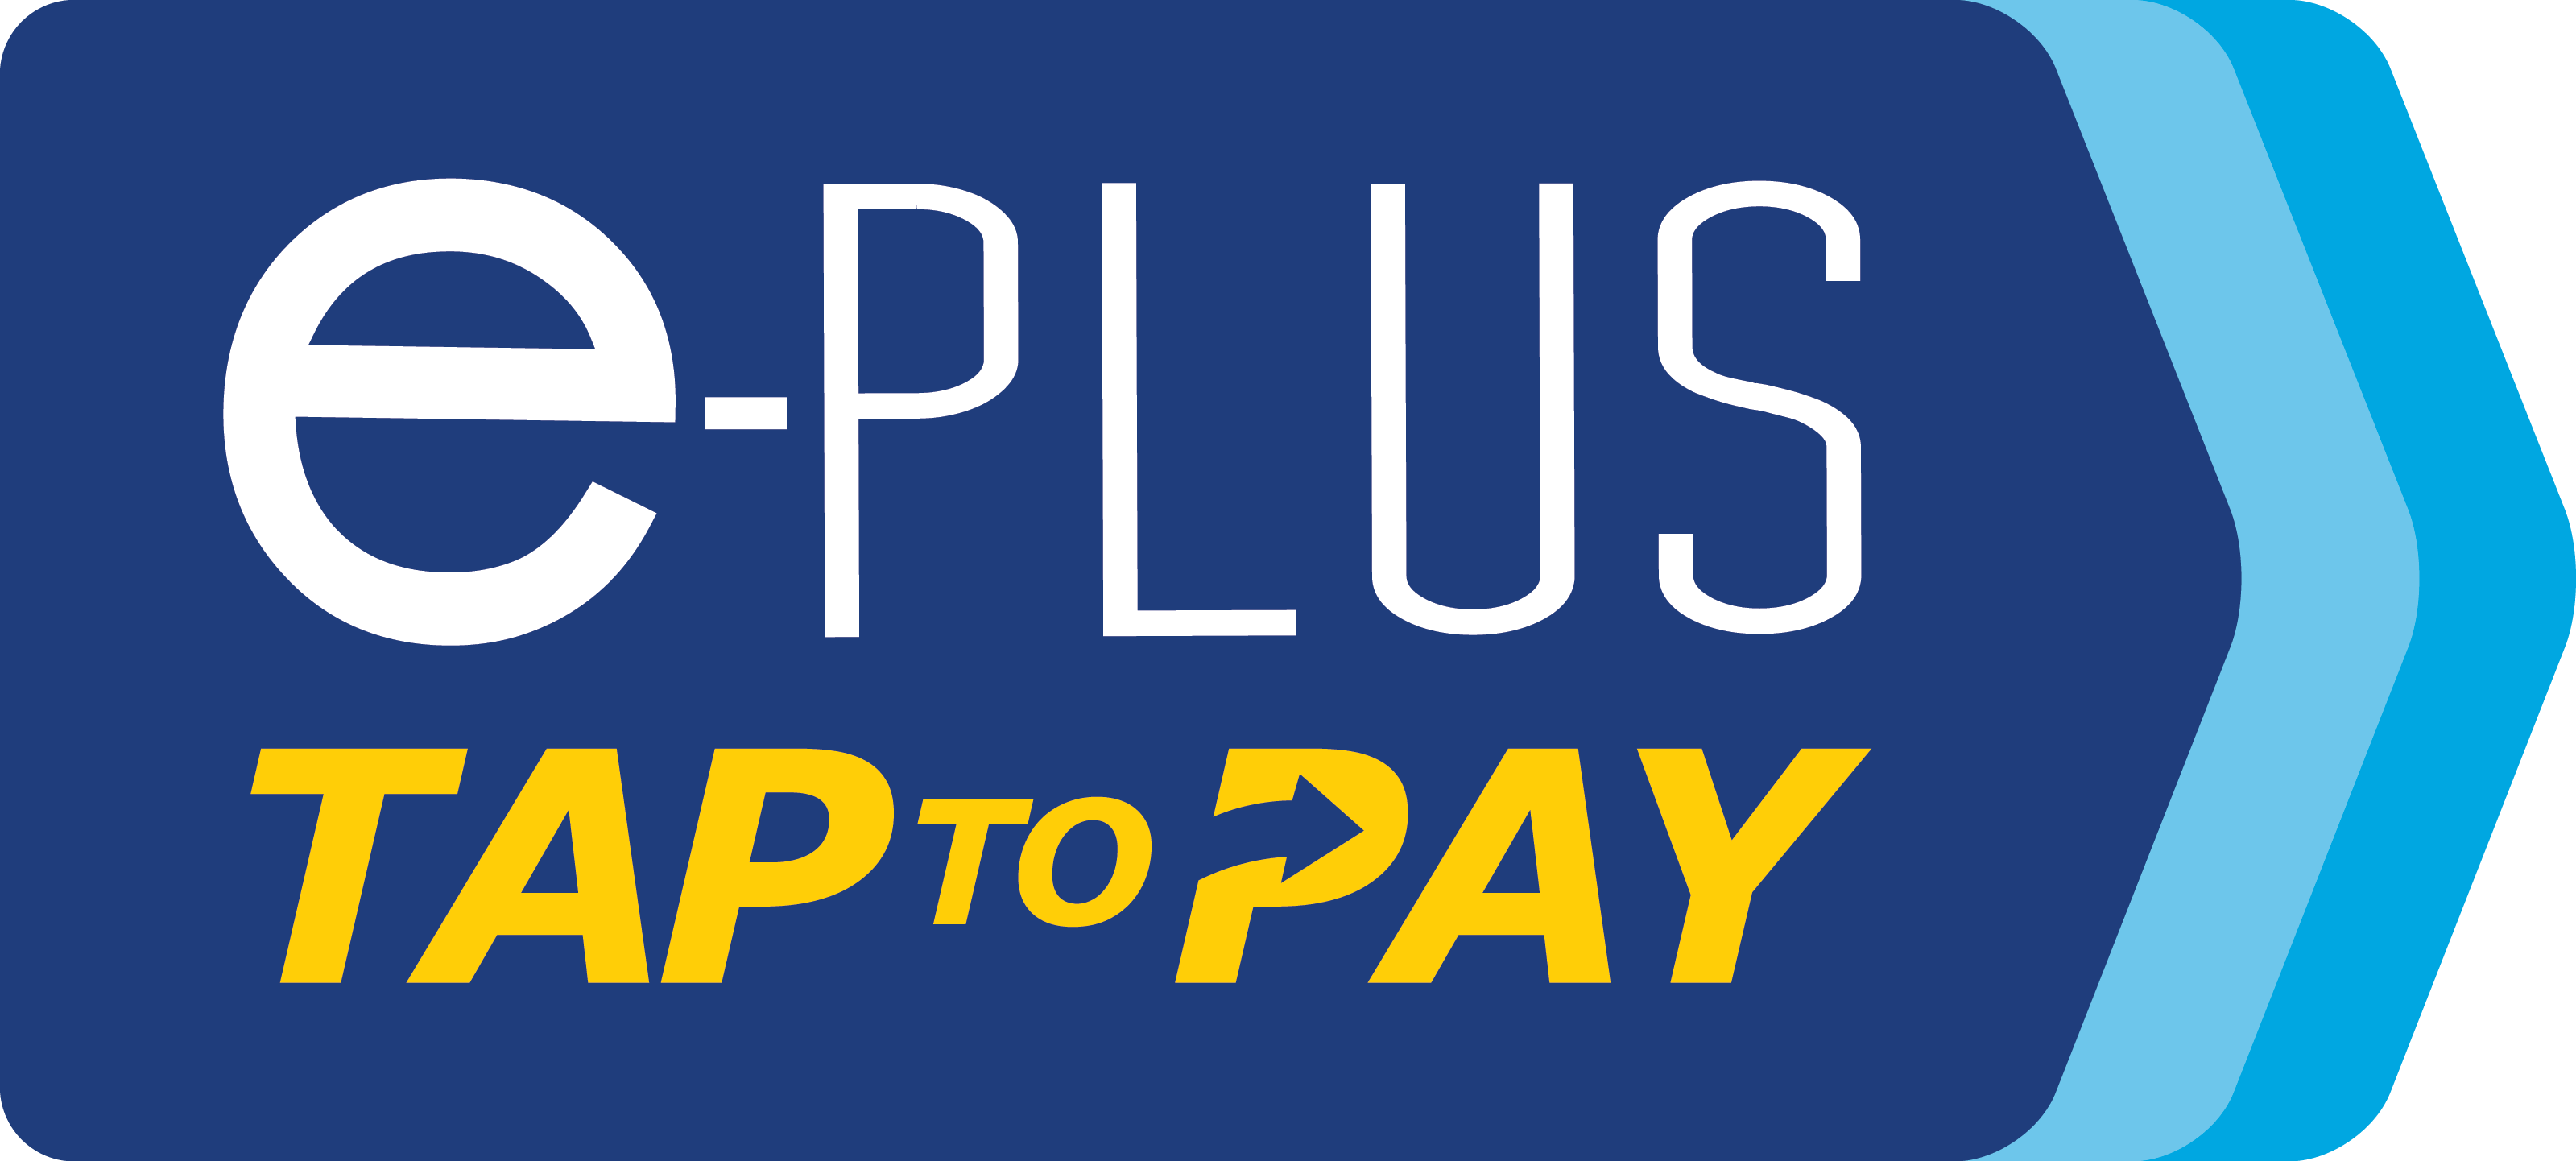 Tap to Pay Logo - SM Launches E Plus Tap To Pay Stored Value Card.com.ph